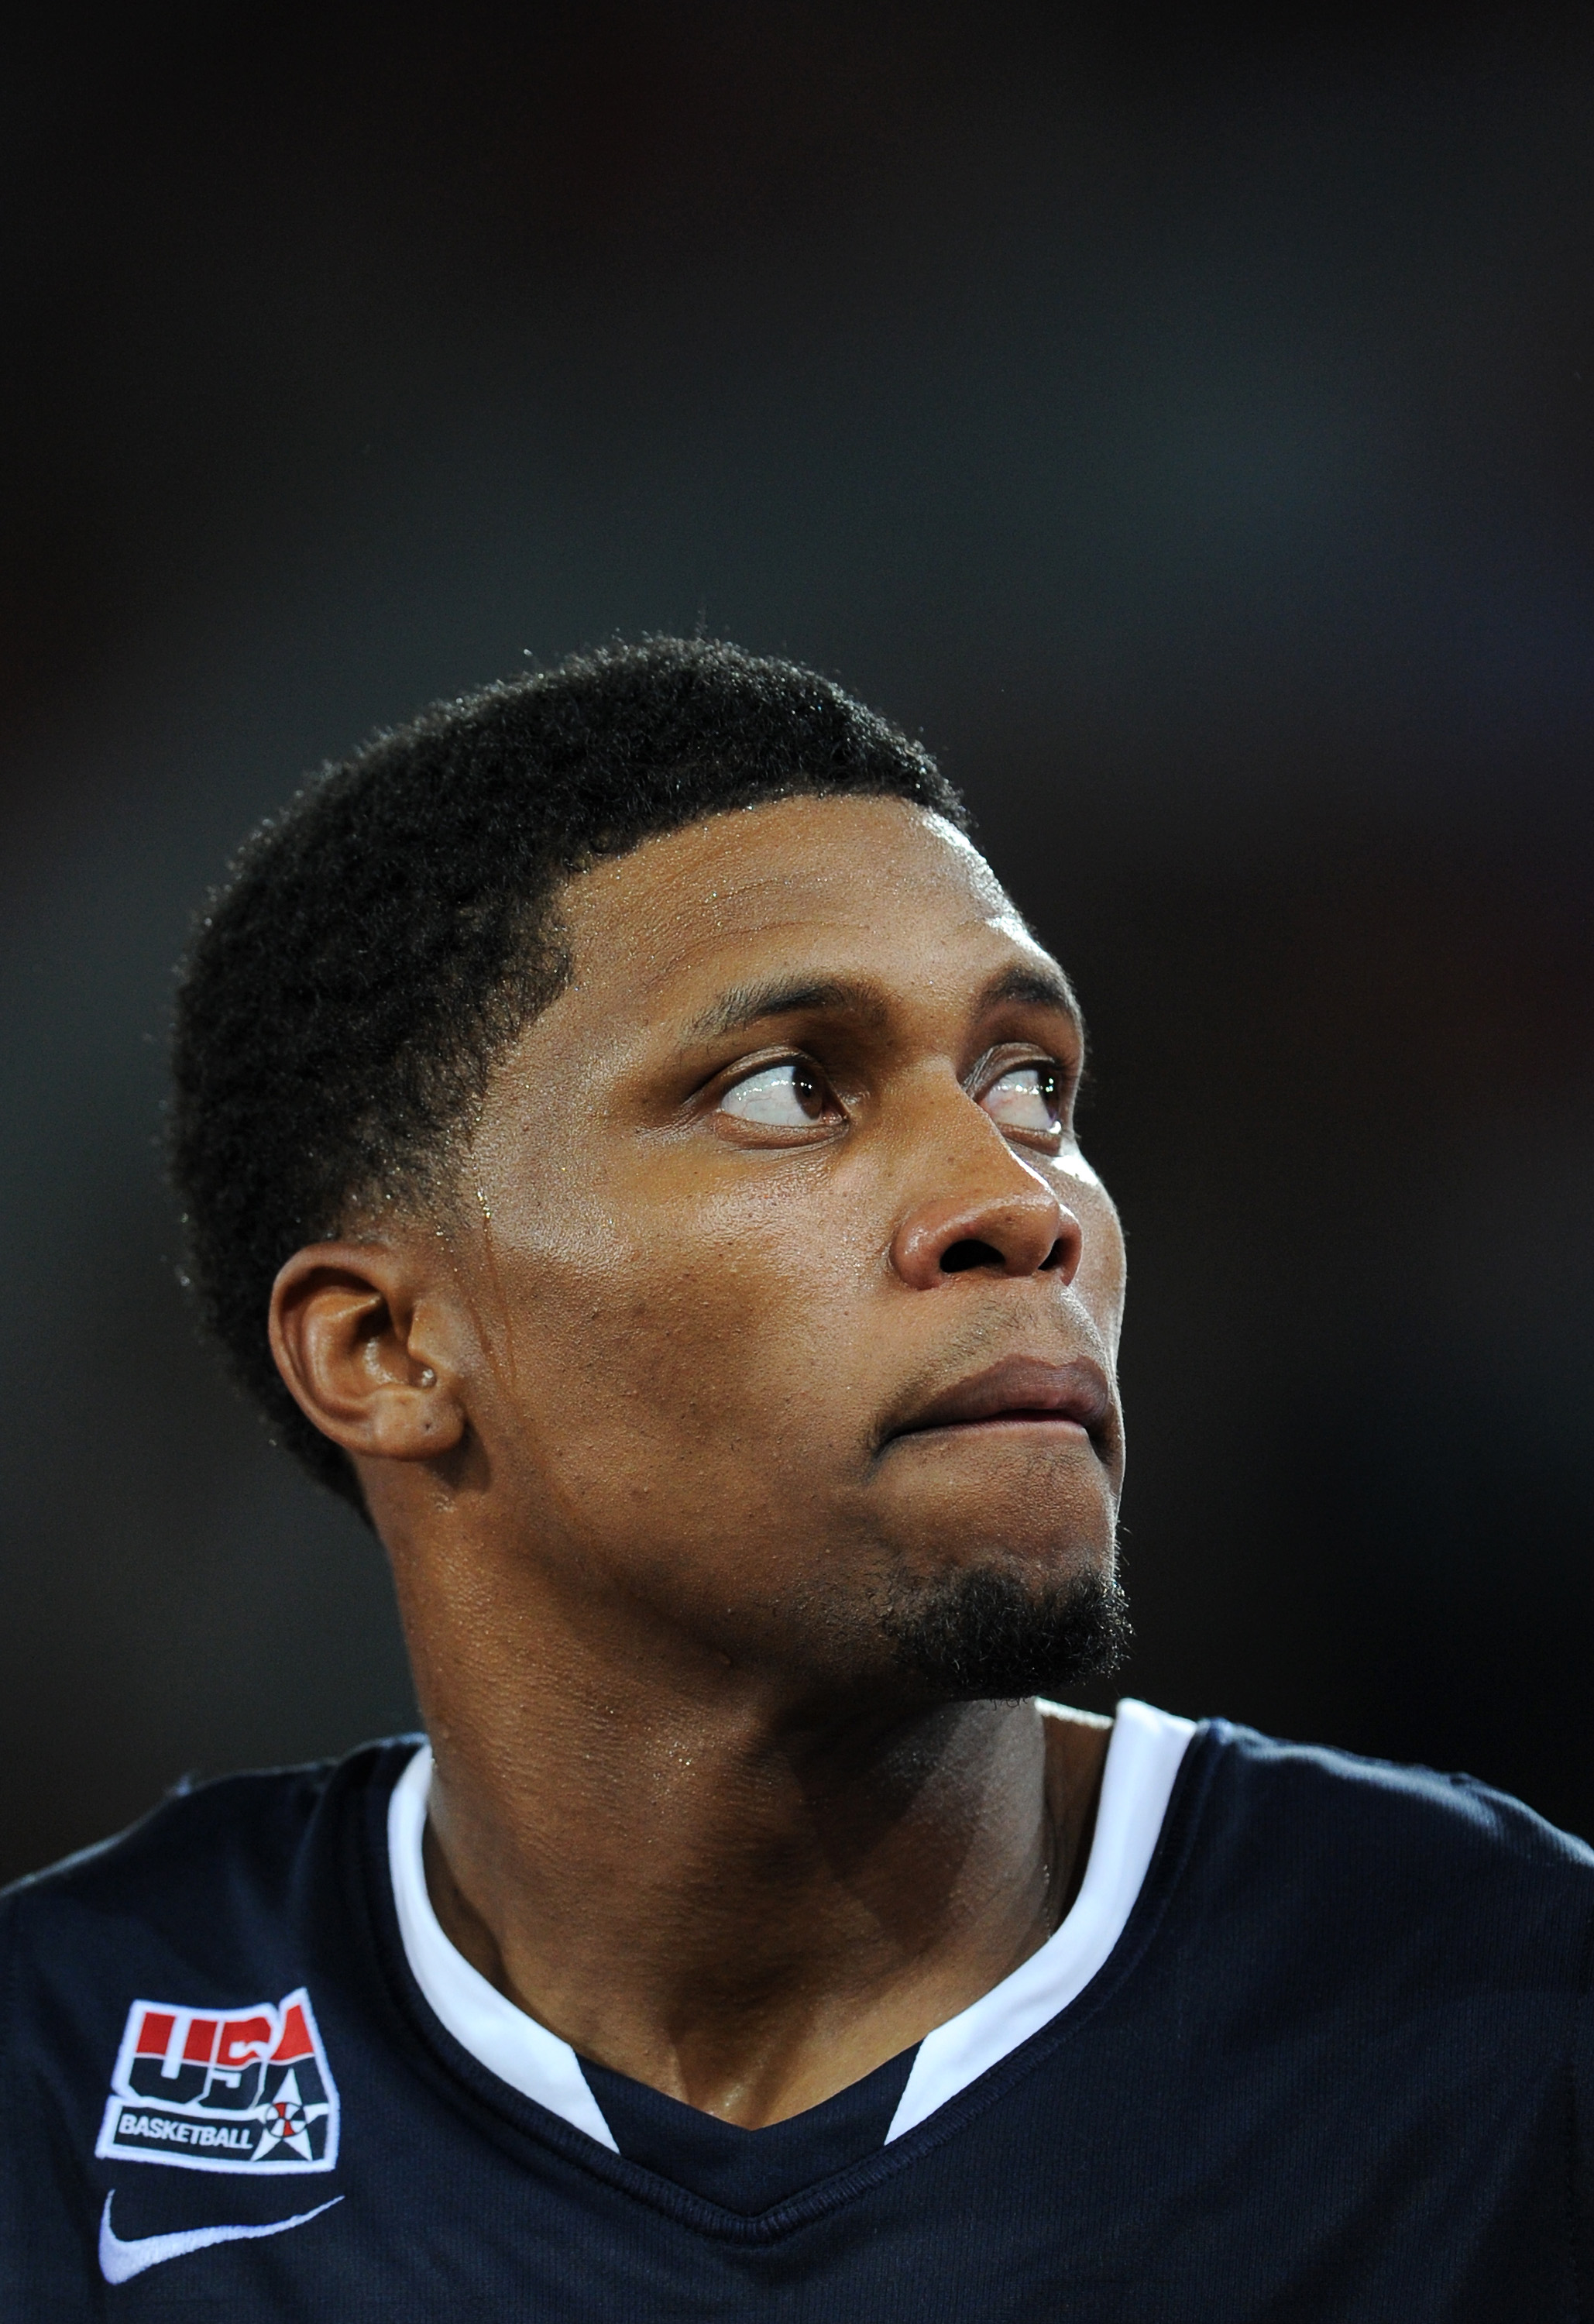 MADRID, SPAIN - AUGUST 22:  Rudy Gay of the USA watches on during a friendly basketball game between Spain and the USA at La Caja Magica on August 22, 2010 in Madrid, Spain.  (Photo by Jasper Juinen/Getty Images)